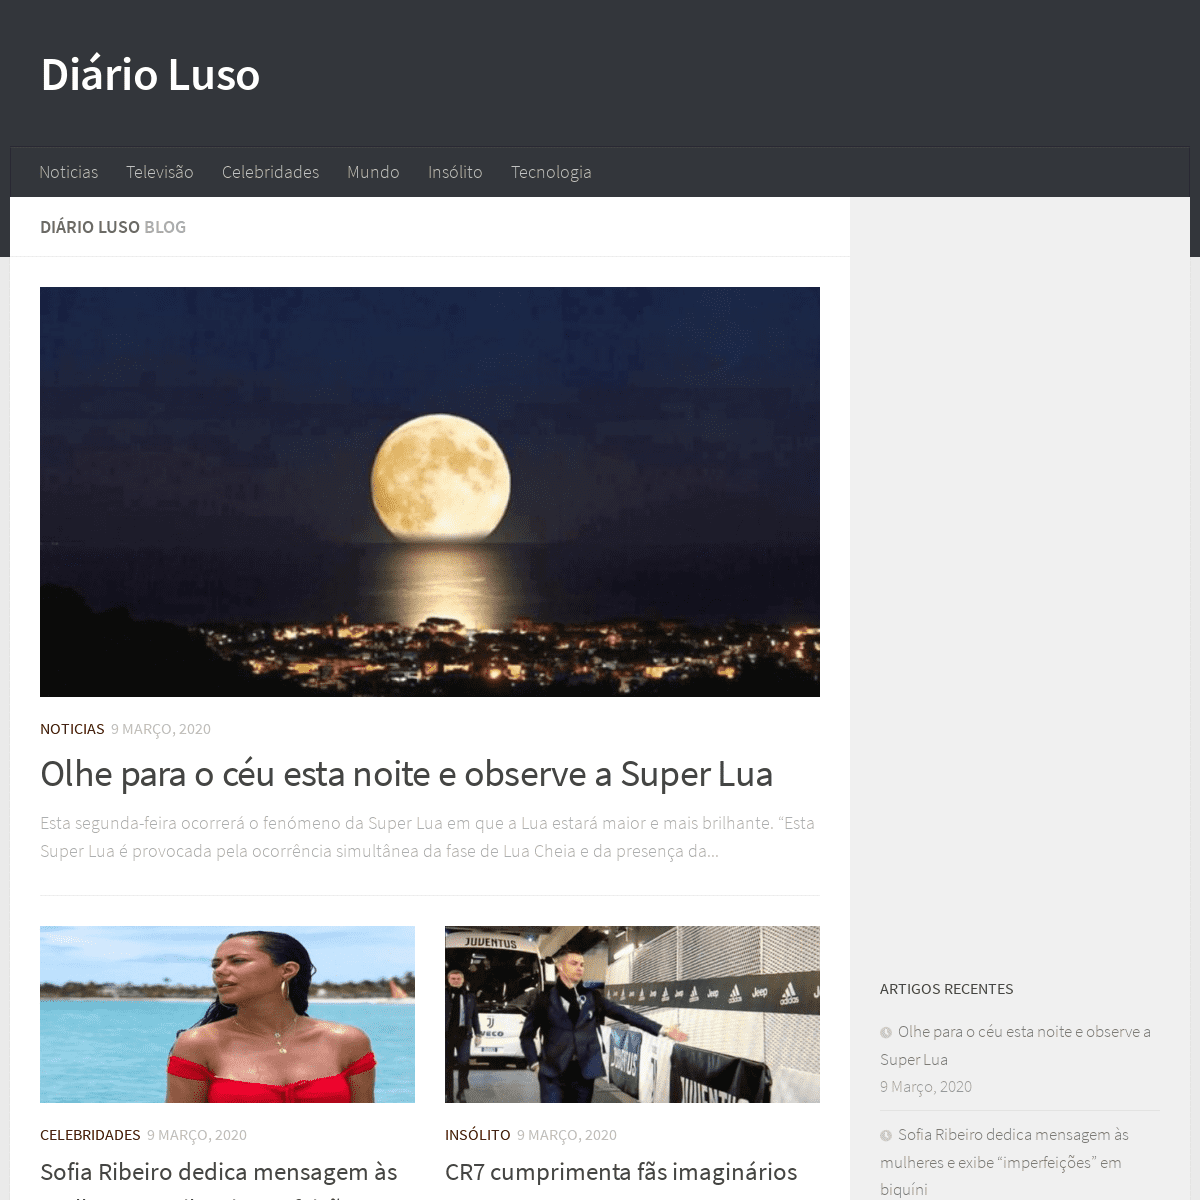 A complete backup of diarioluso.com